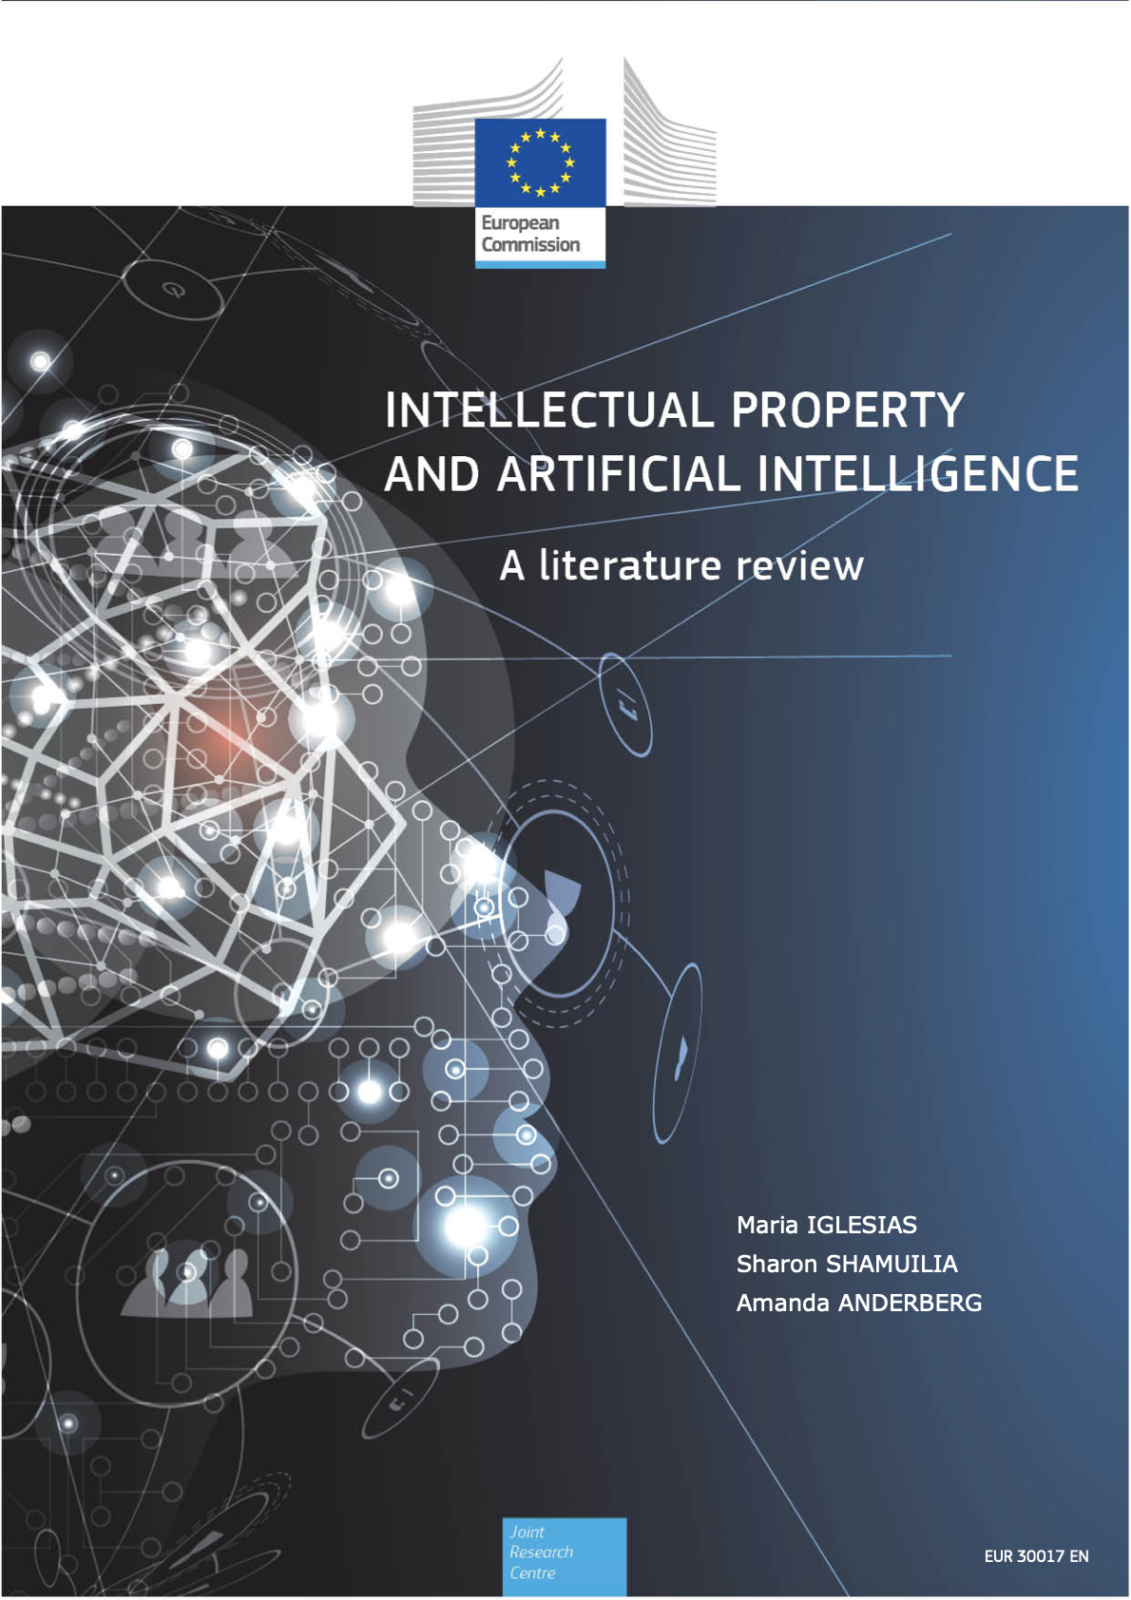 IP and Artificial Intelligence